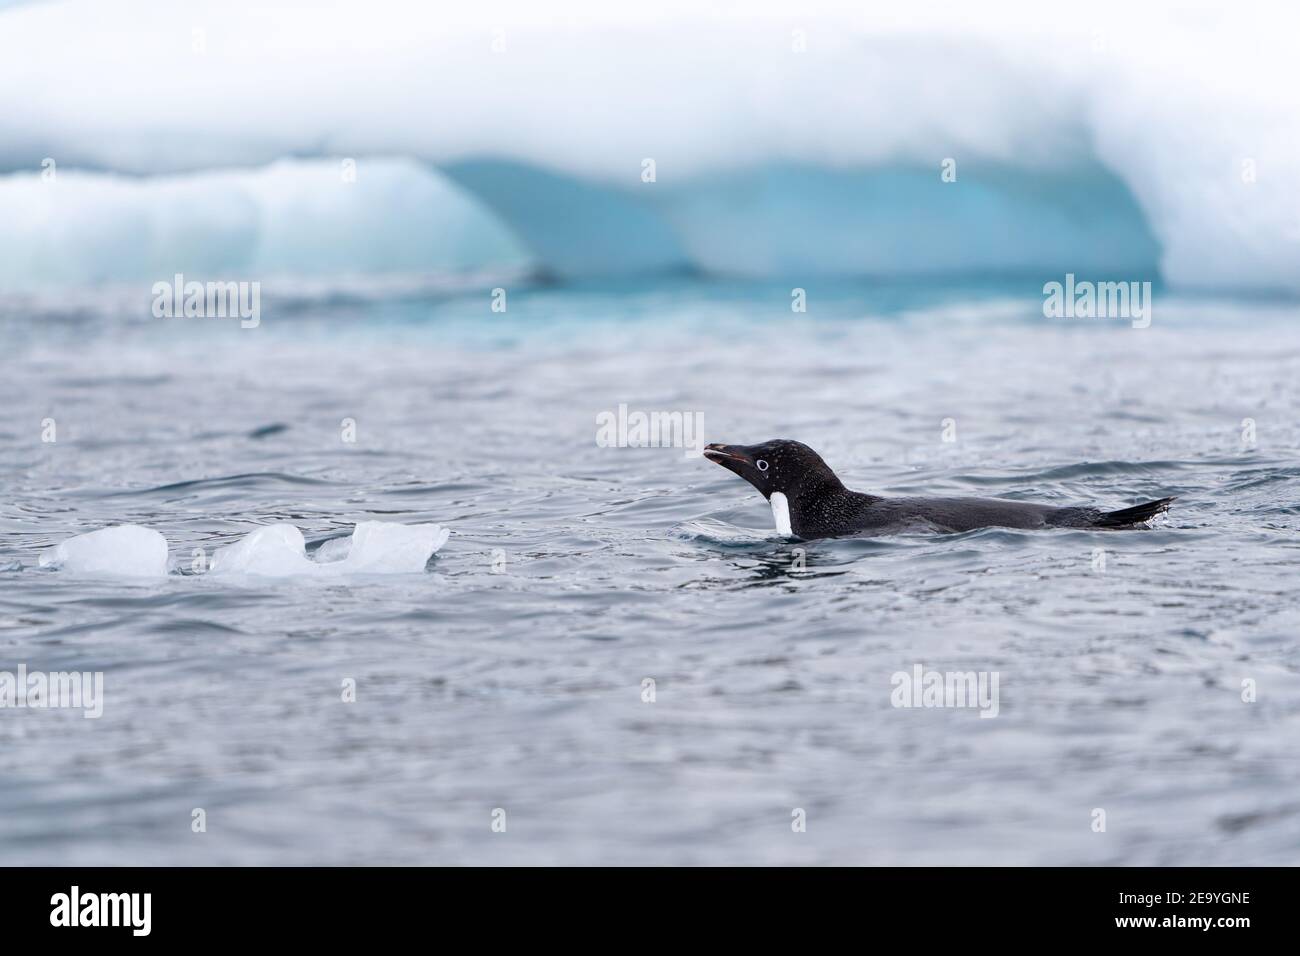 An Adelie penguin happily swims in the icy waters off the Antarctic peninsula Stock Photo